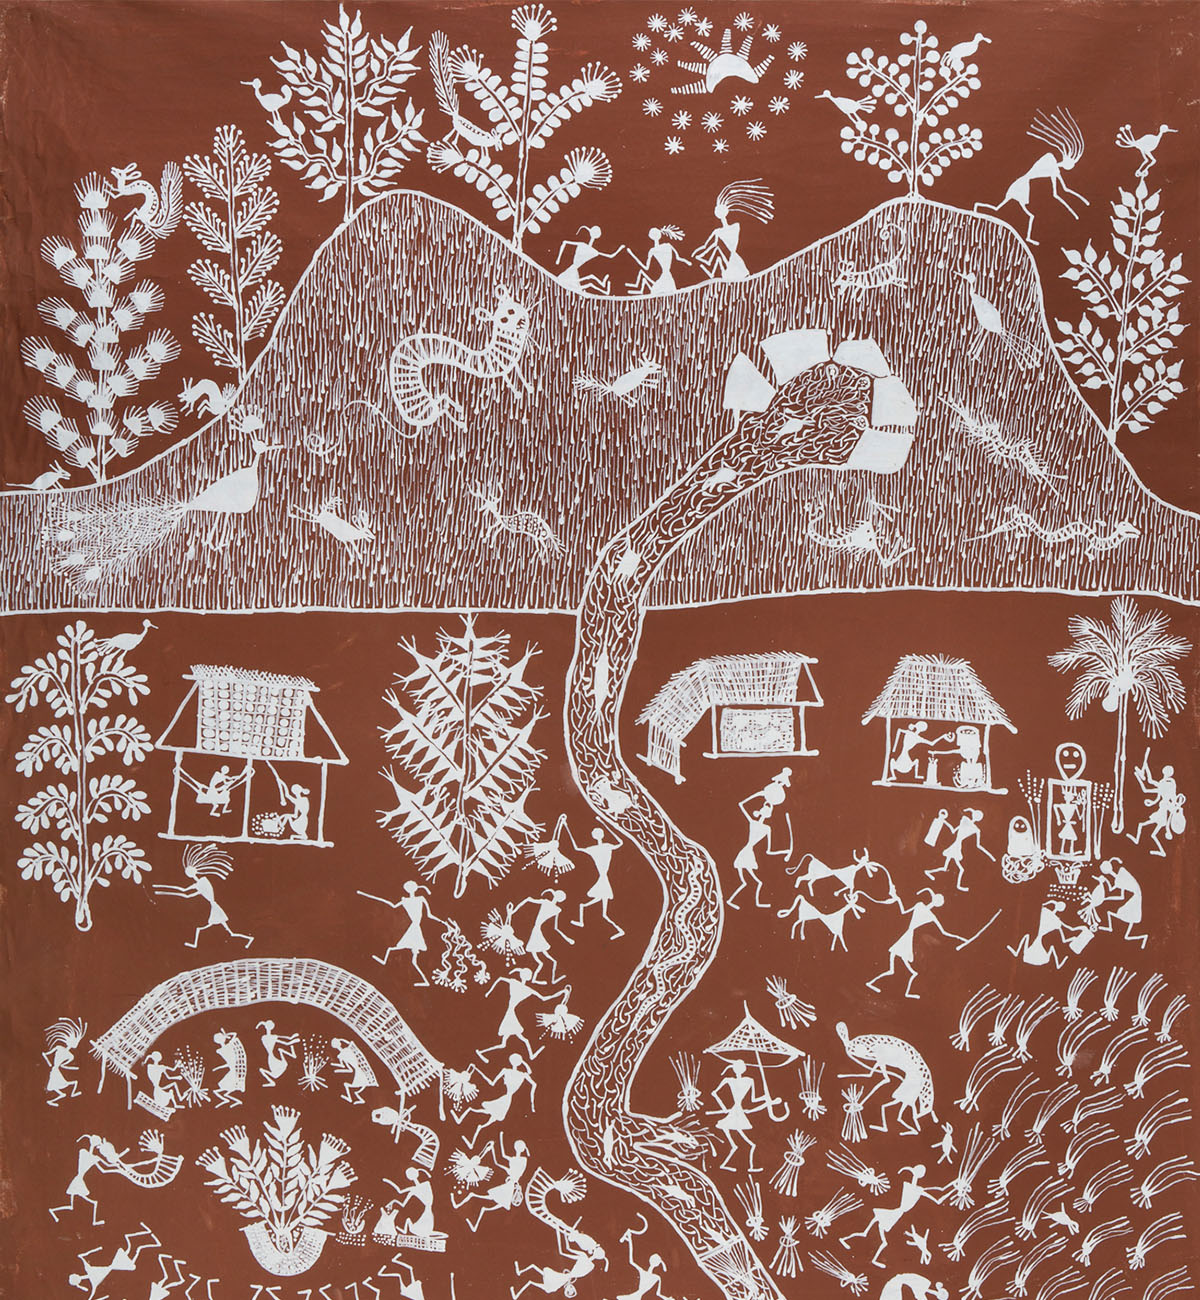 A Warli painting depicting trees, a hill and a river, above scenes of village activities.